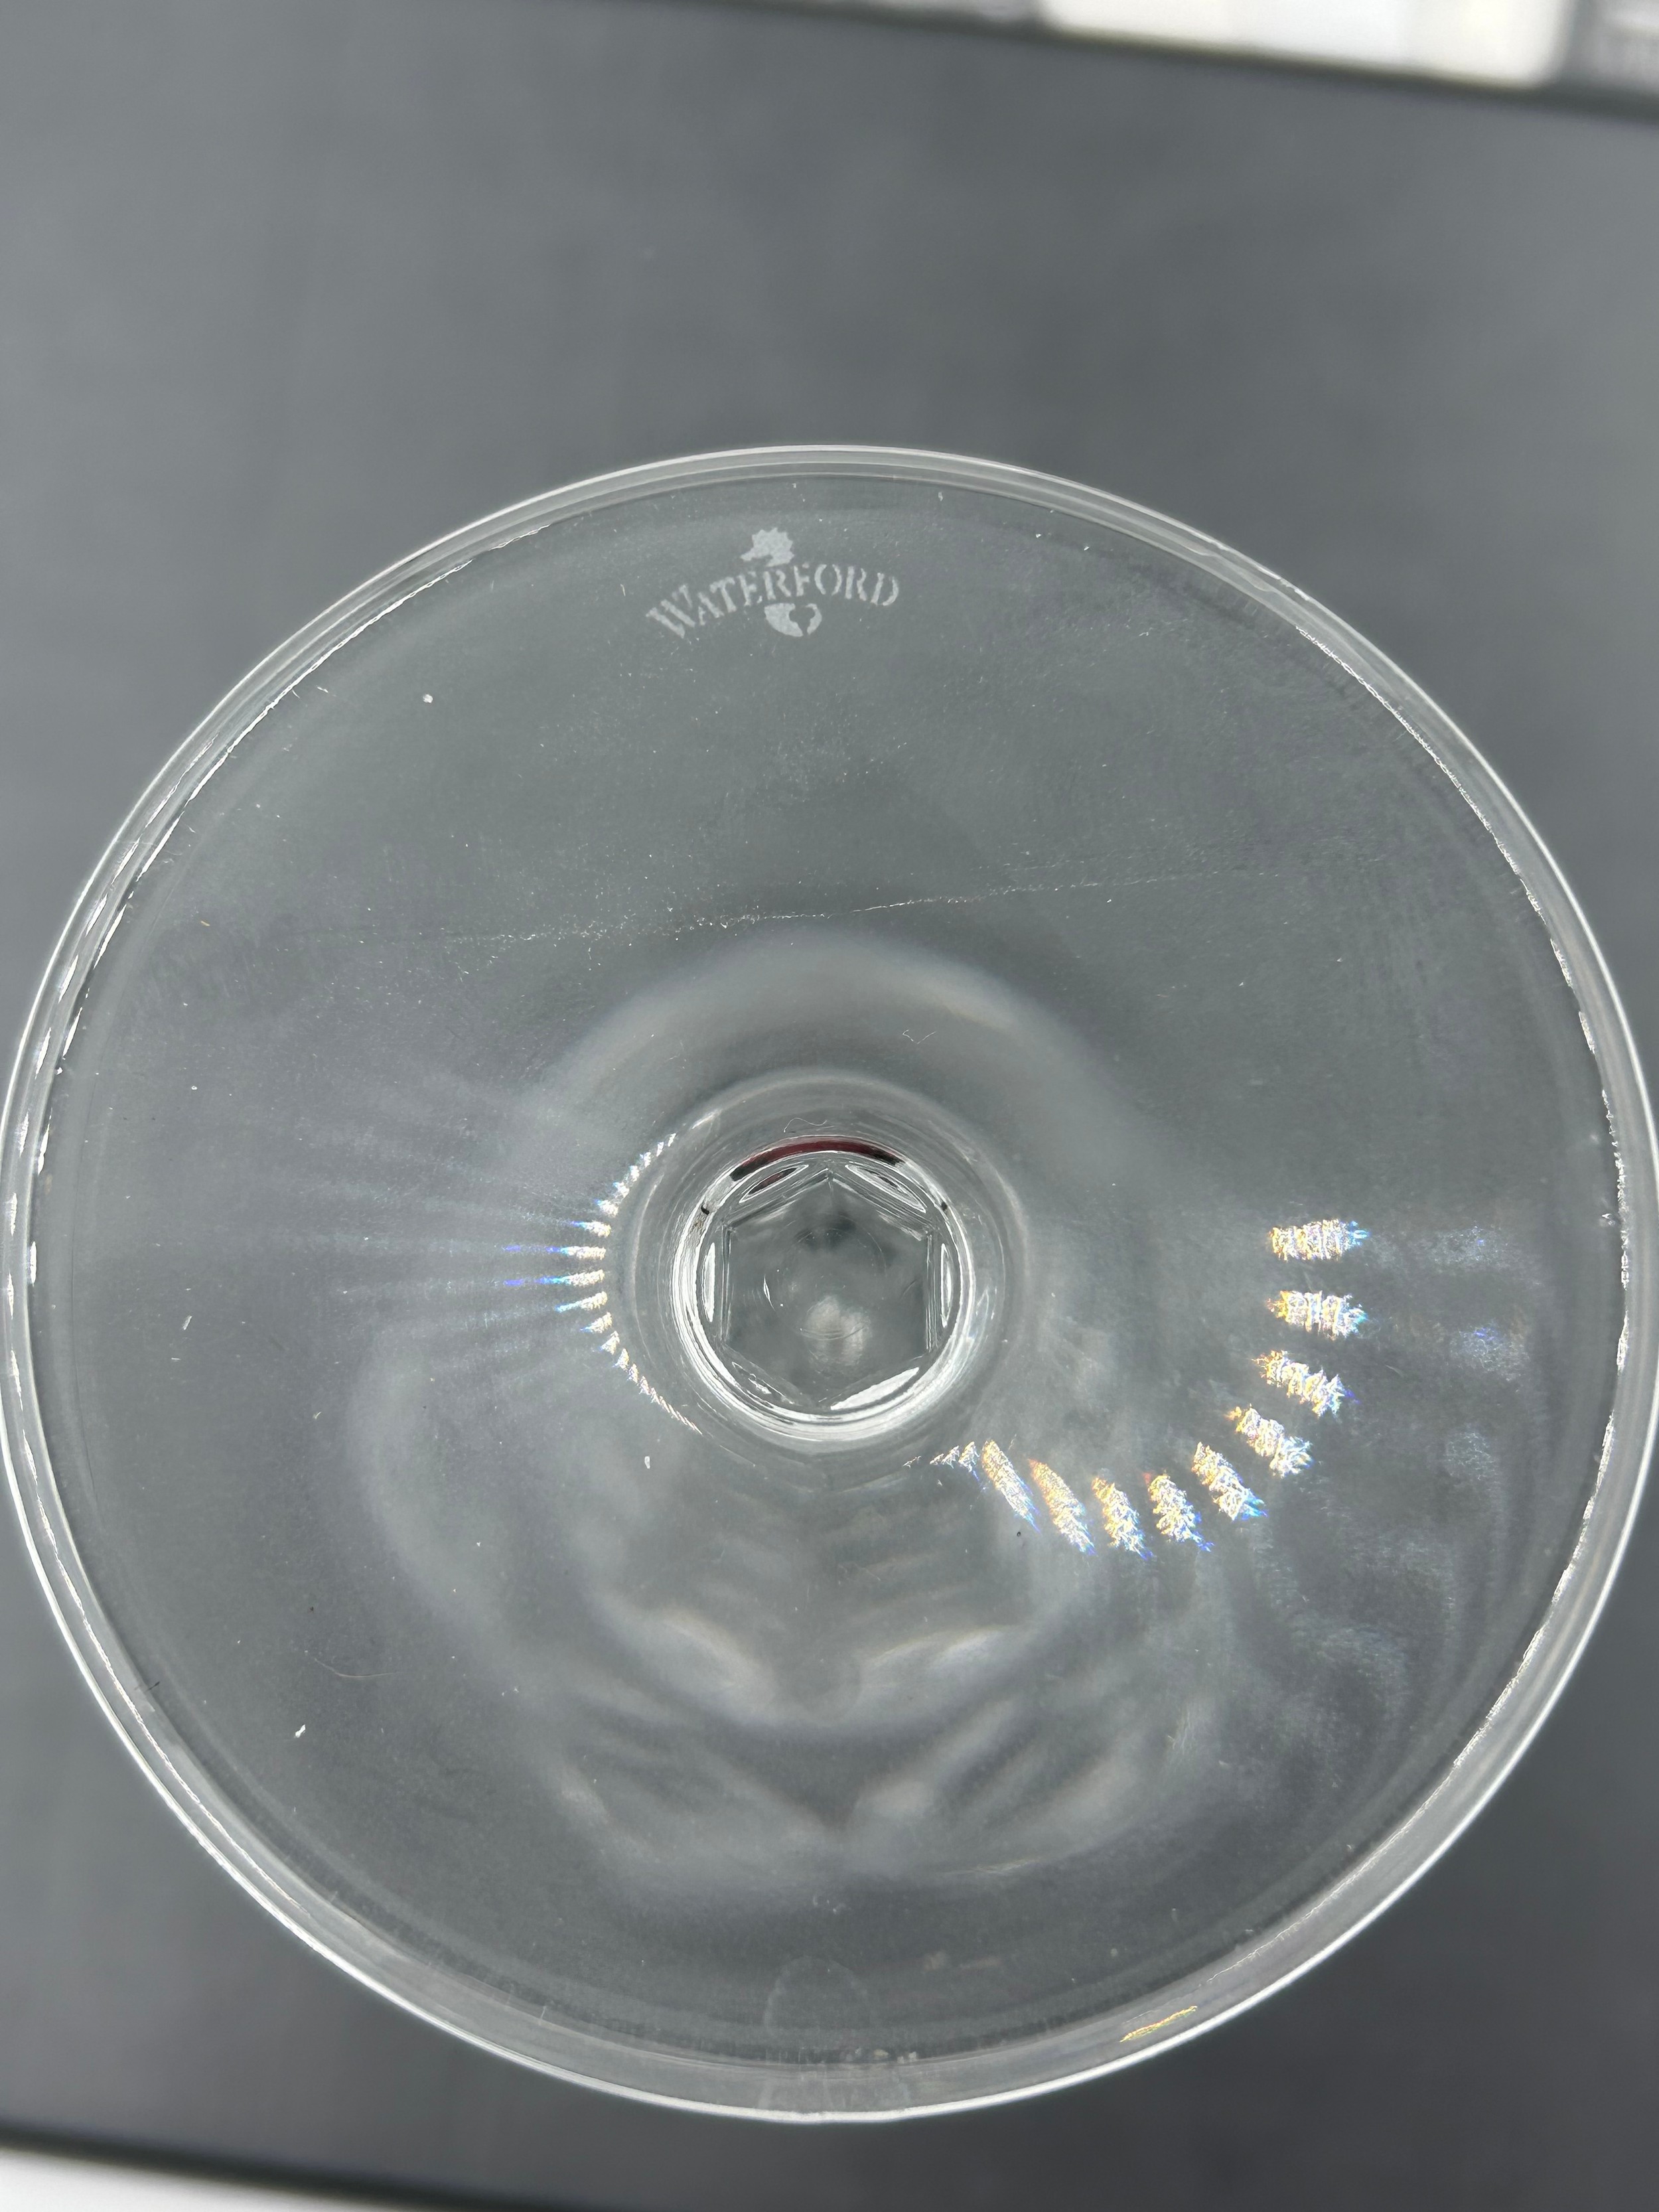 Two boxed pairs of Waterford crystal champagne flutes from 'The Millennium 2000 Collection', 23. - Image 3 of 3